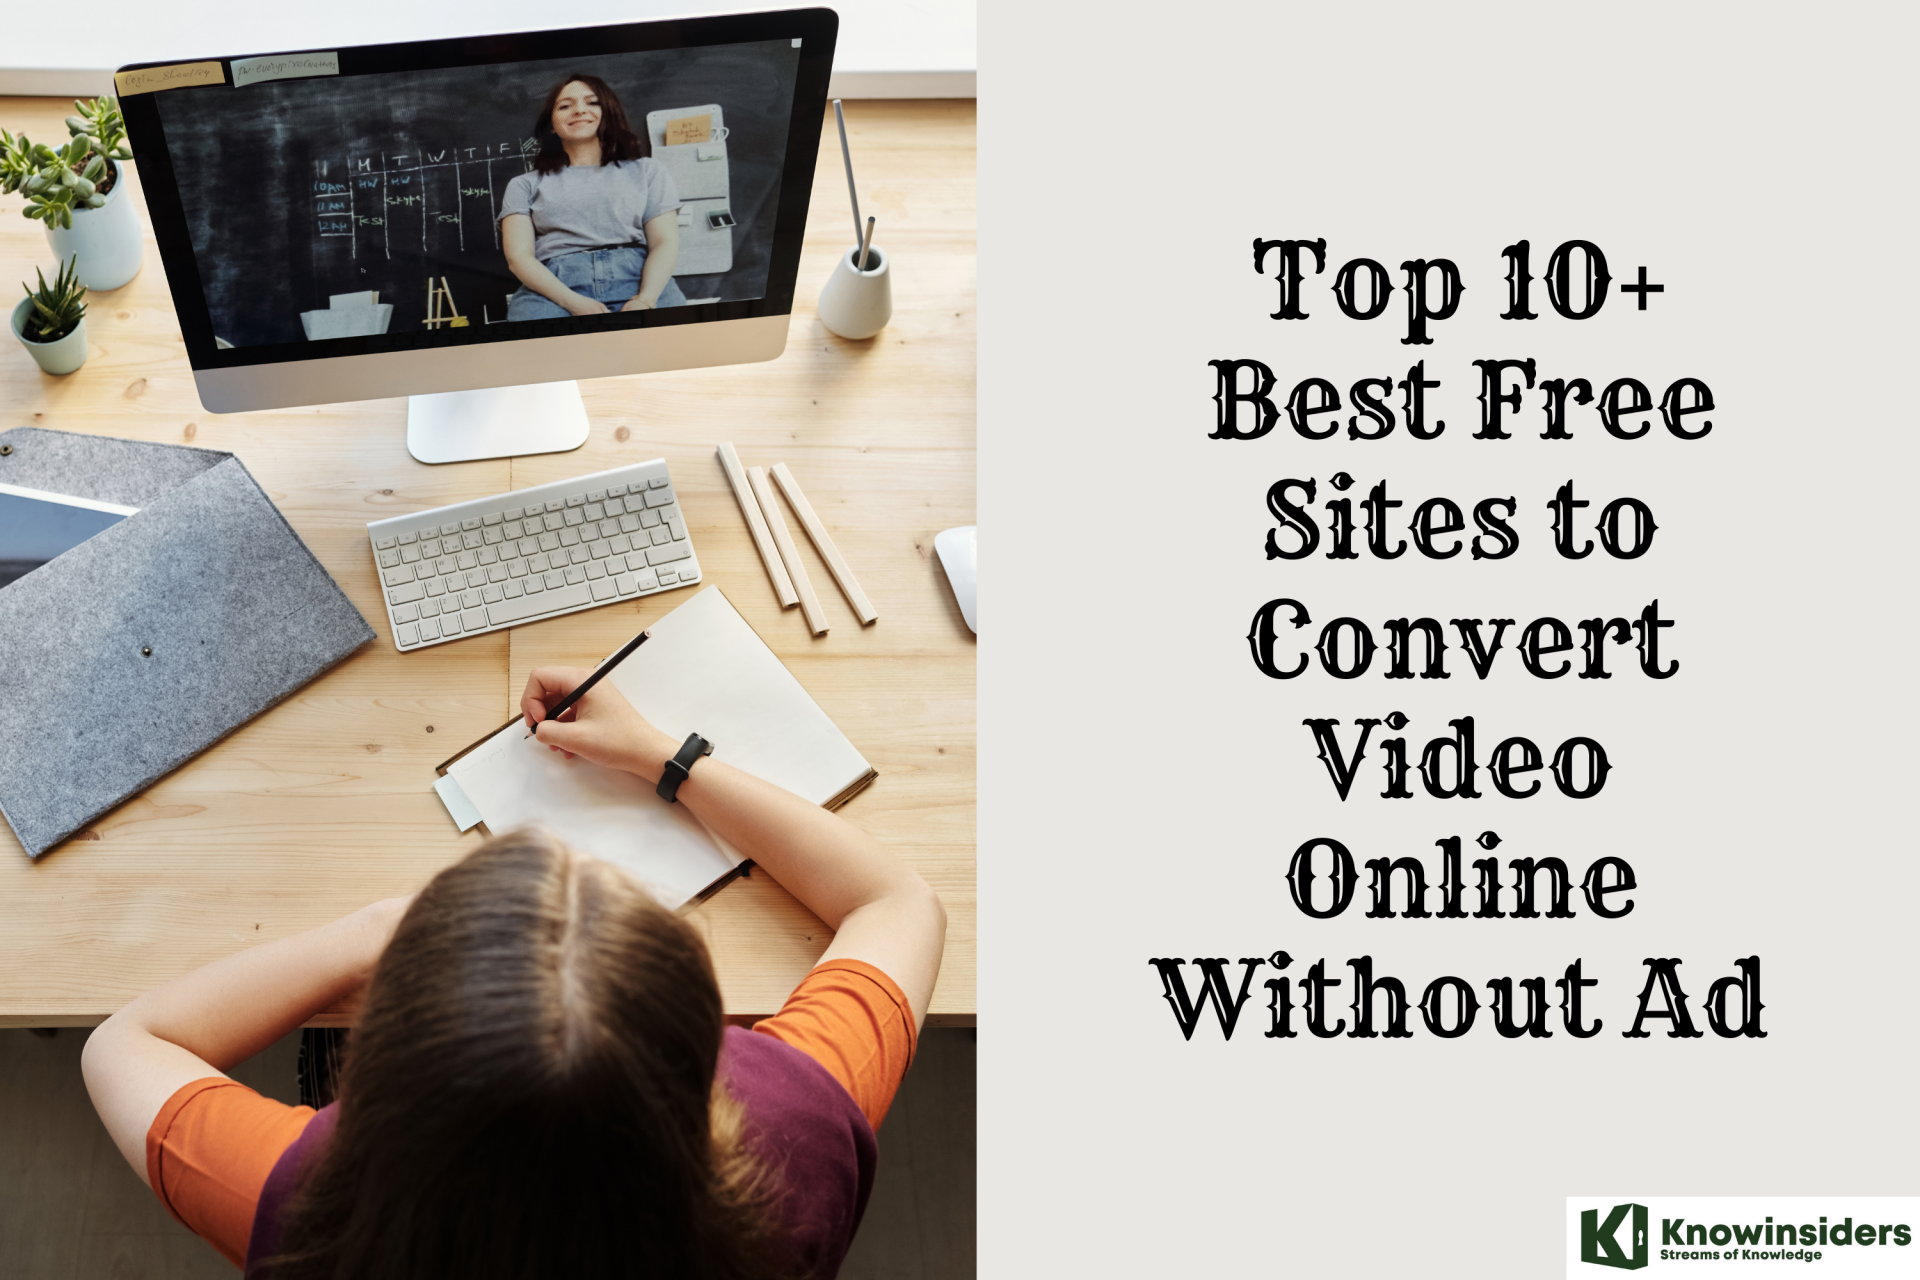 Top 10+ Best Free Sites to Convert Video Online Without Ad